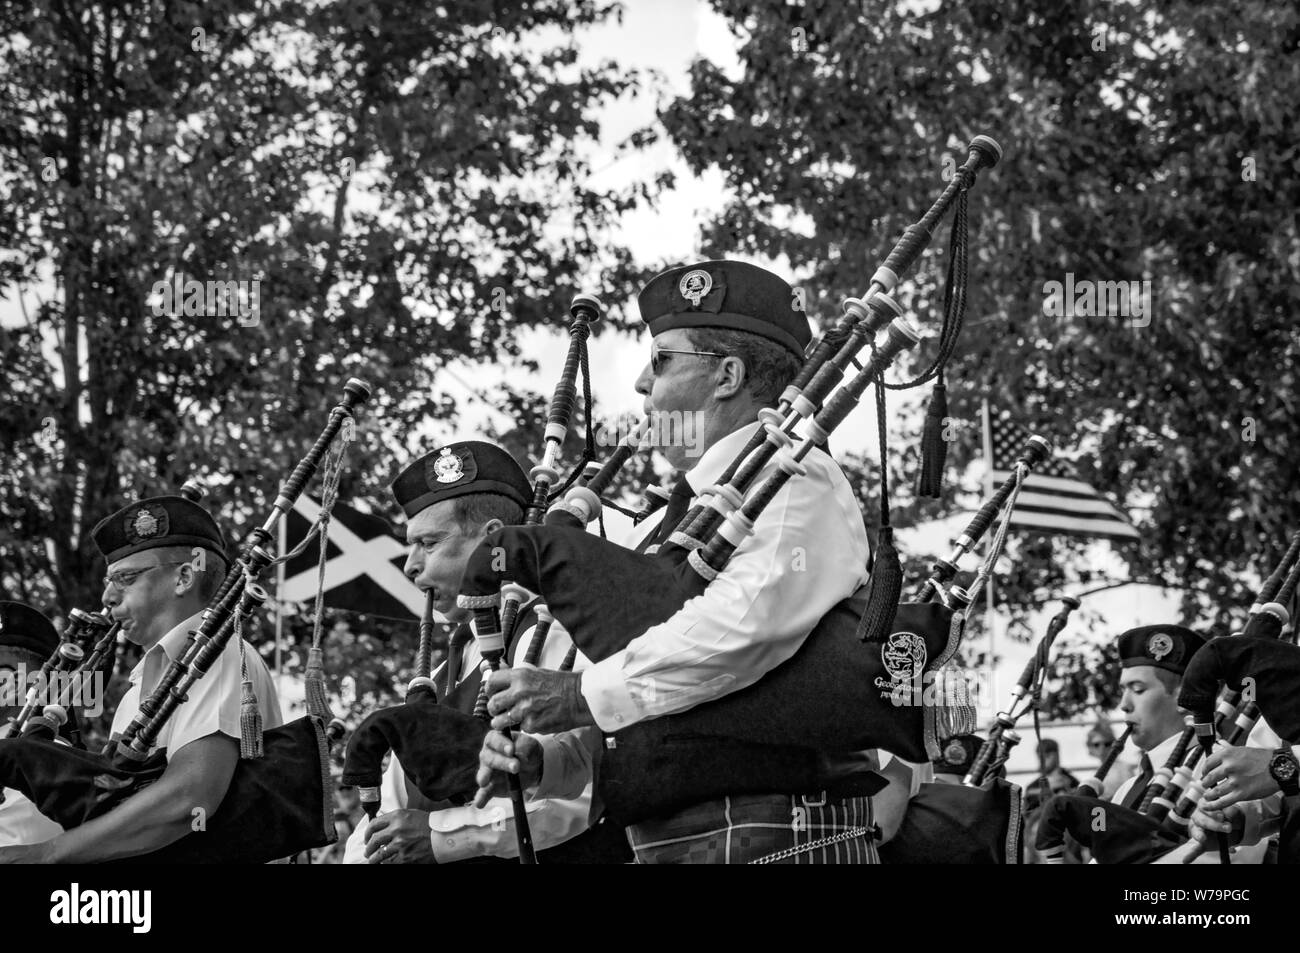 Fergus, Ontario, Canada - 08 11 2018: Pipers of the Pipes and Drums band paricipating in the Pipe Band contest held by Pipers and Pipe Band Society of Stock Photo